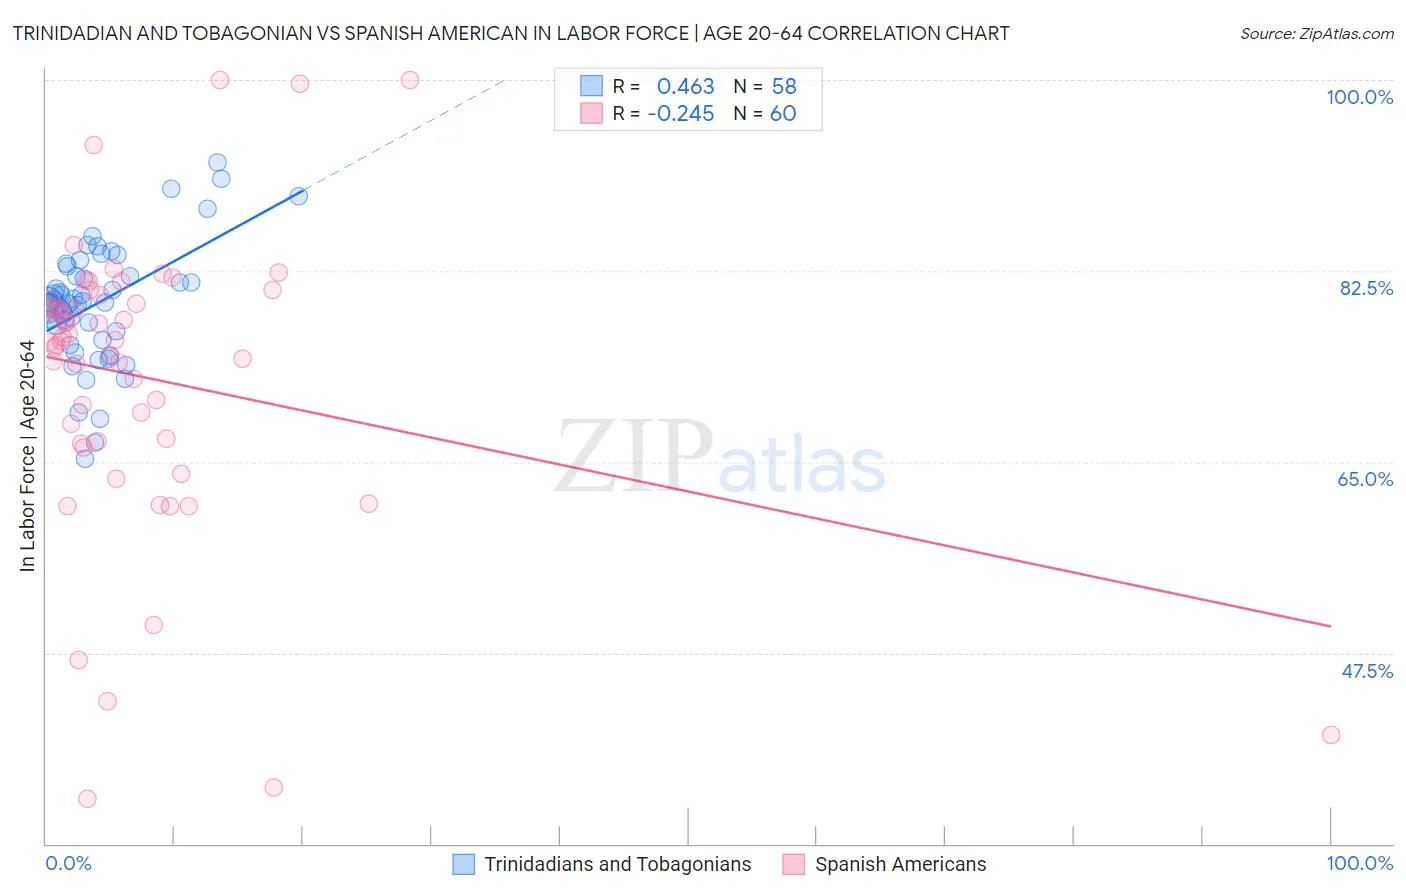 Trinidadian and Tobagonian vs Spanish American In Labor Force | Age 20-64